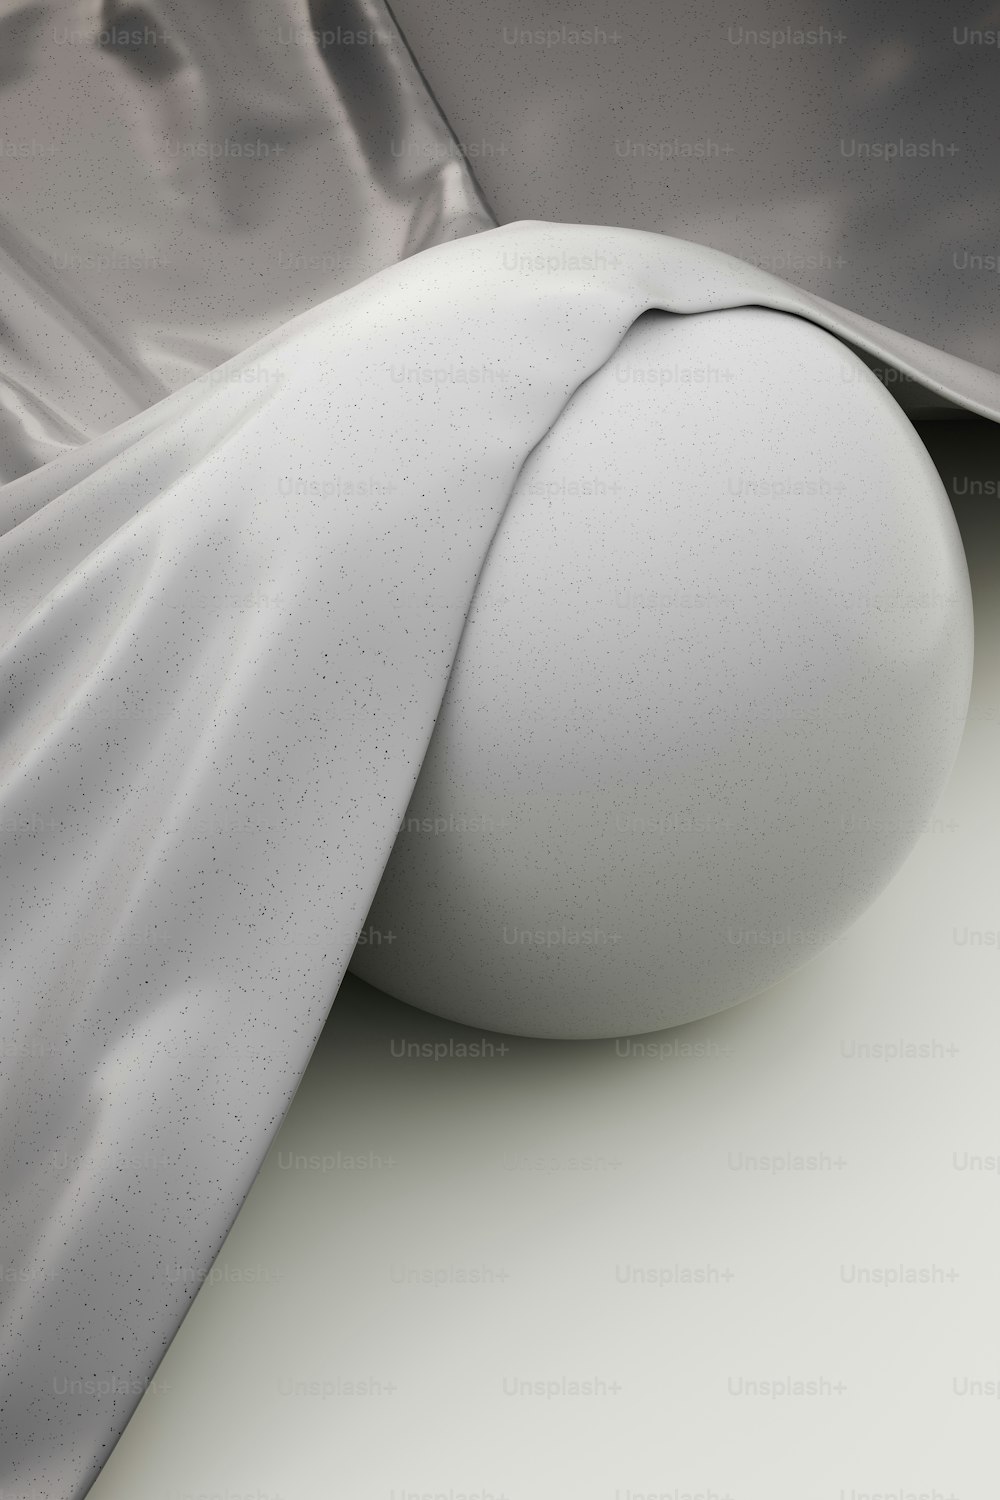 a white ball sitting on top of a white surface